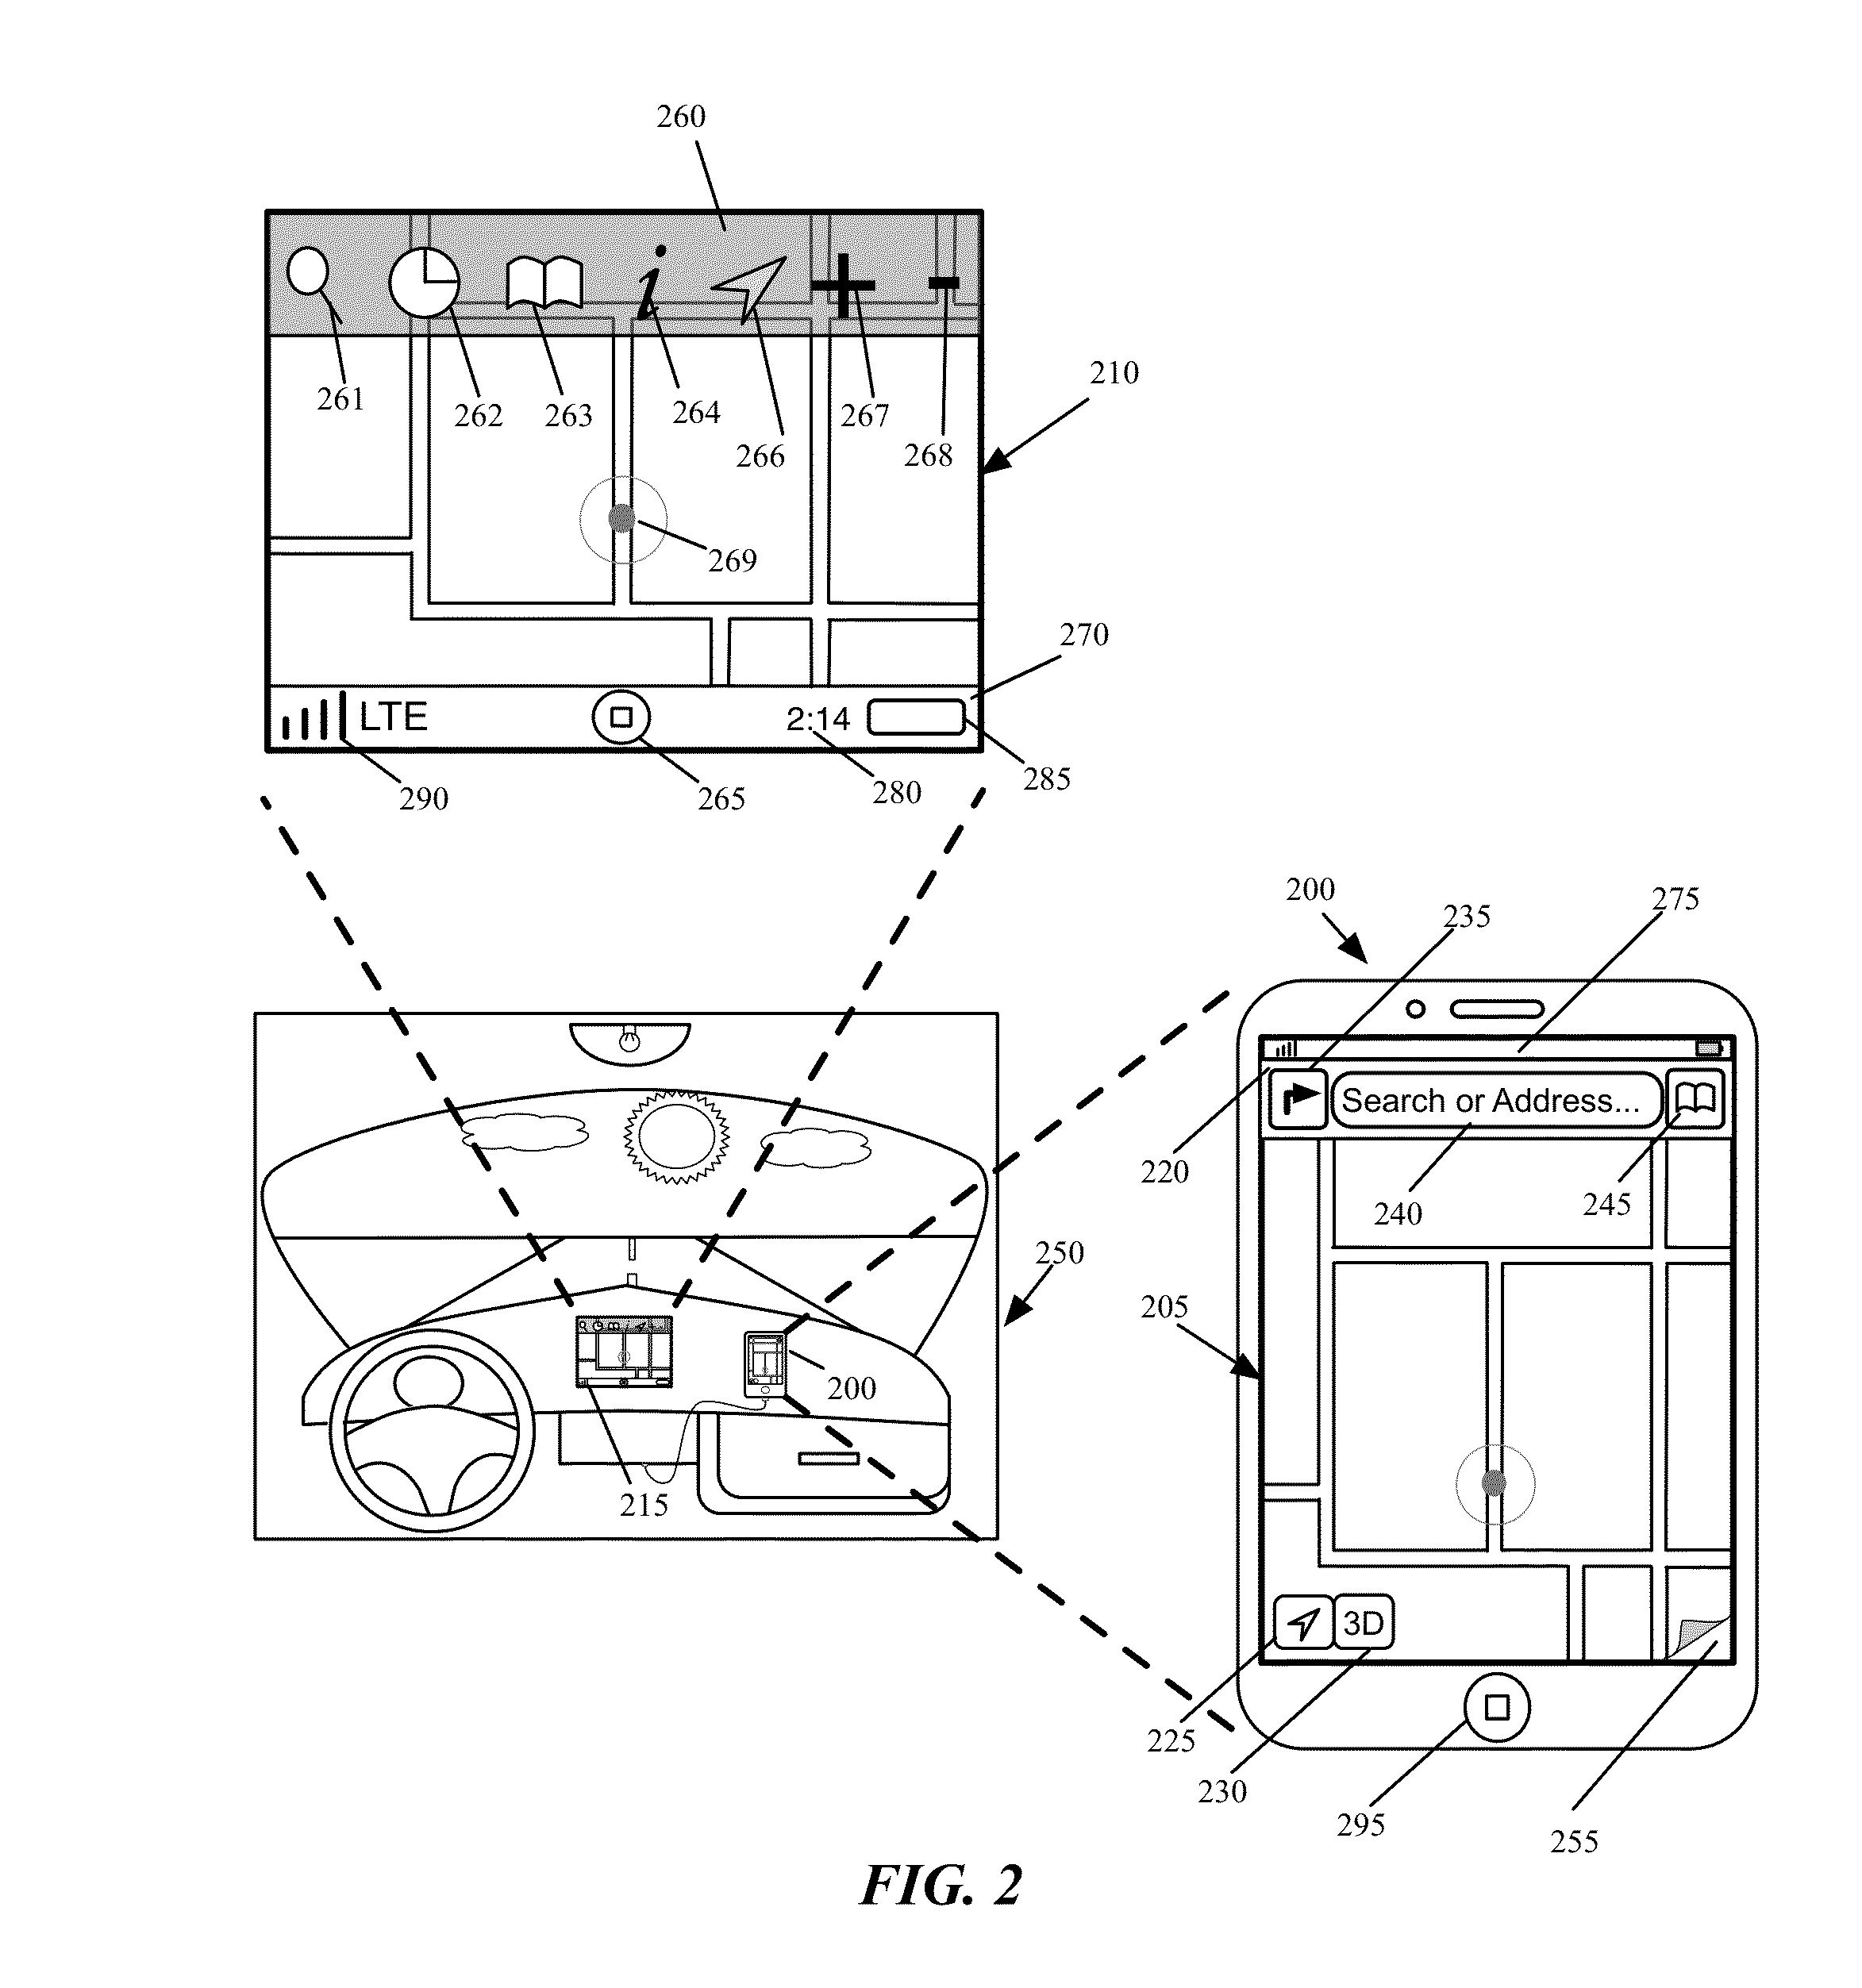 Mapping Application with Turn-by-Turn Navigation Mode for Output to Vehicle Display